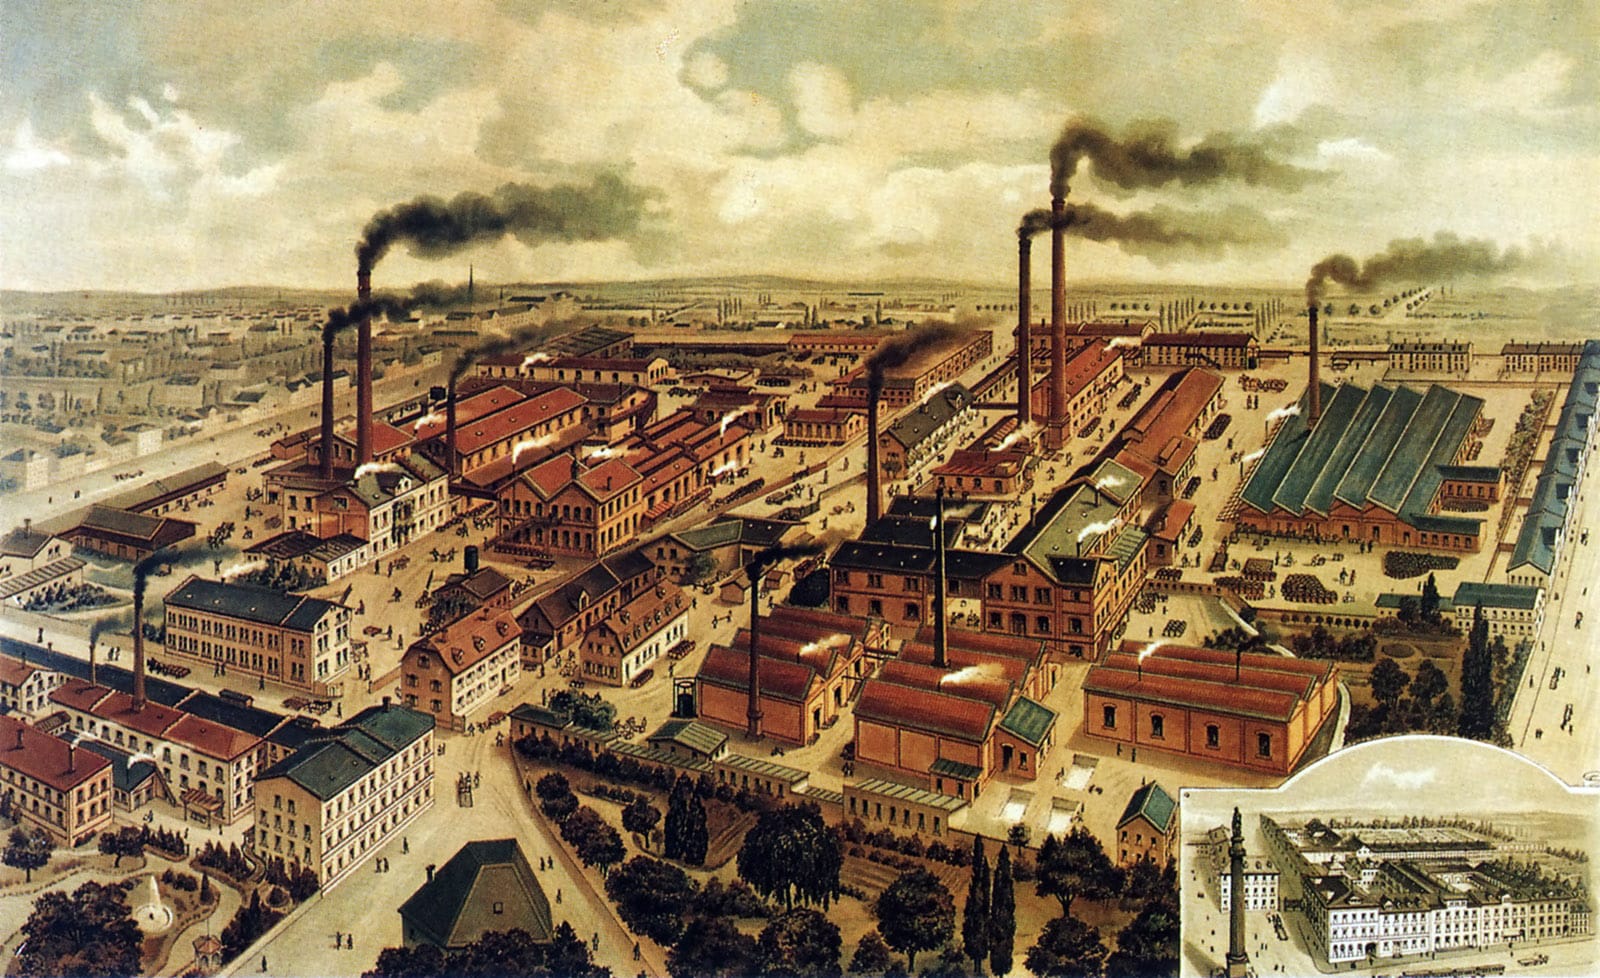 The Merck factory in Darmstadt - 1892 - home to the world's first phara-chemical company